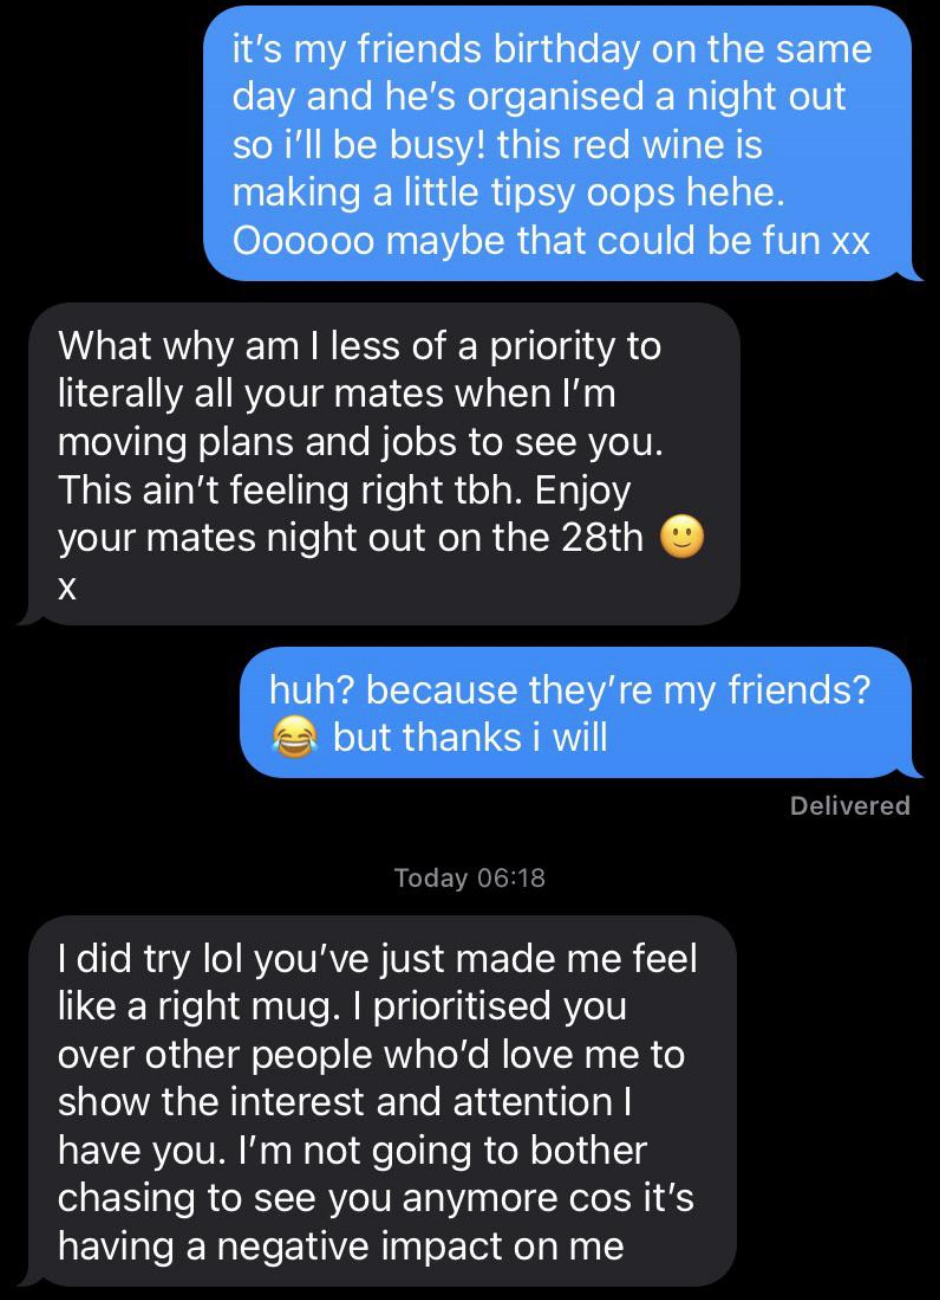 The woman says she can&#x27;t go on a date because she has plans with friends, and the man responds with a guilt trip about how she&#x27;s not making him a priority